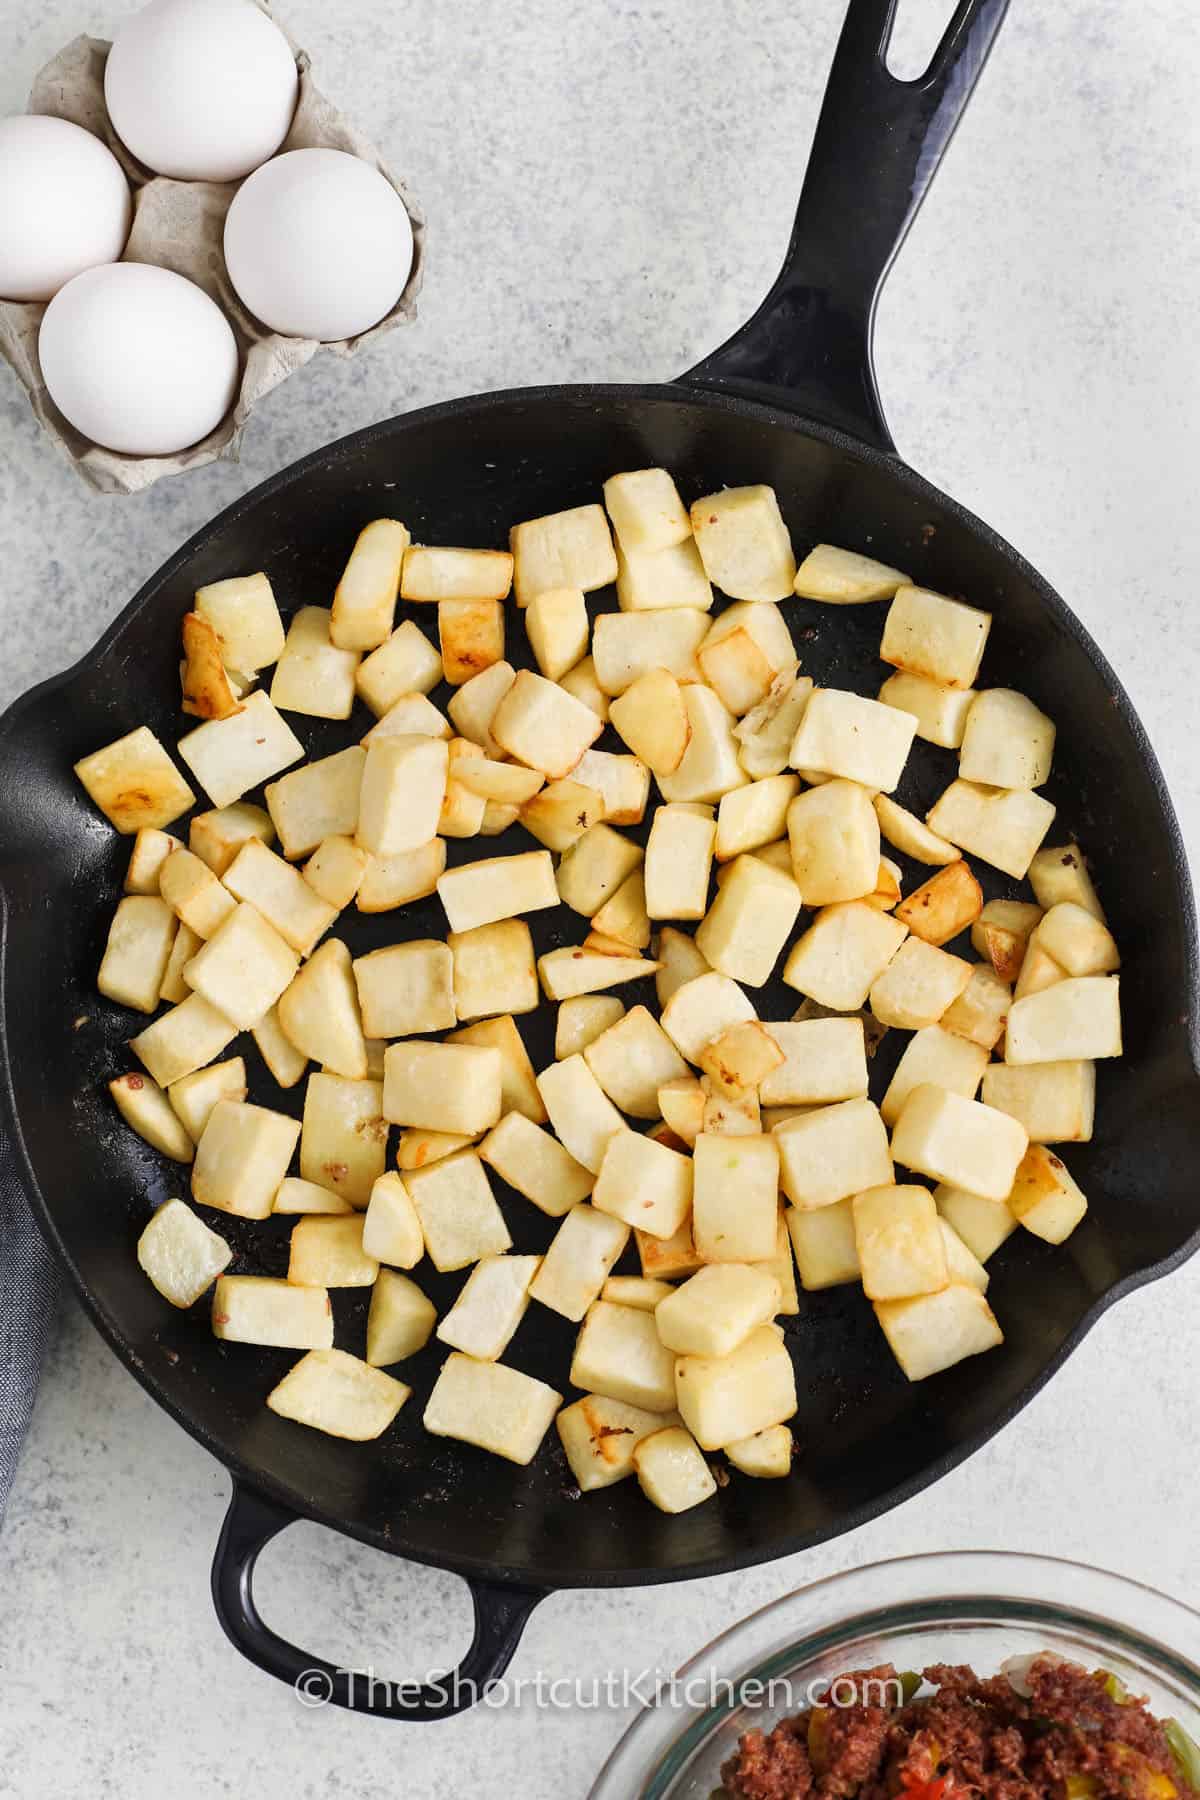 cooking potatoes to make Canned Corned Beef Hash